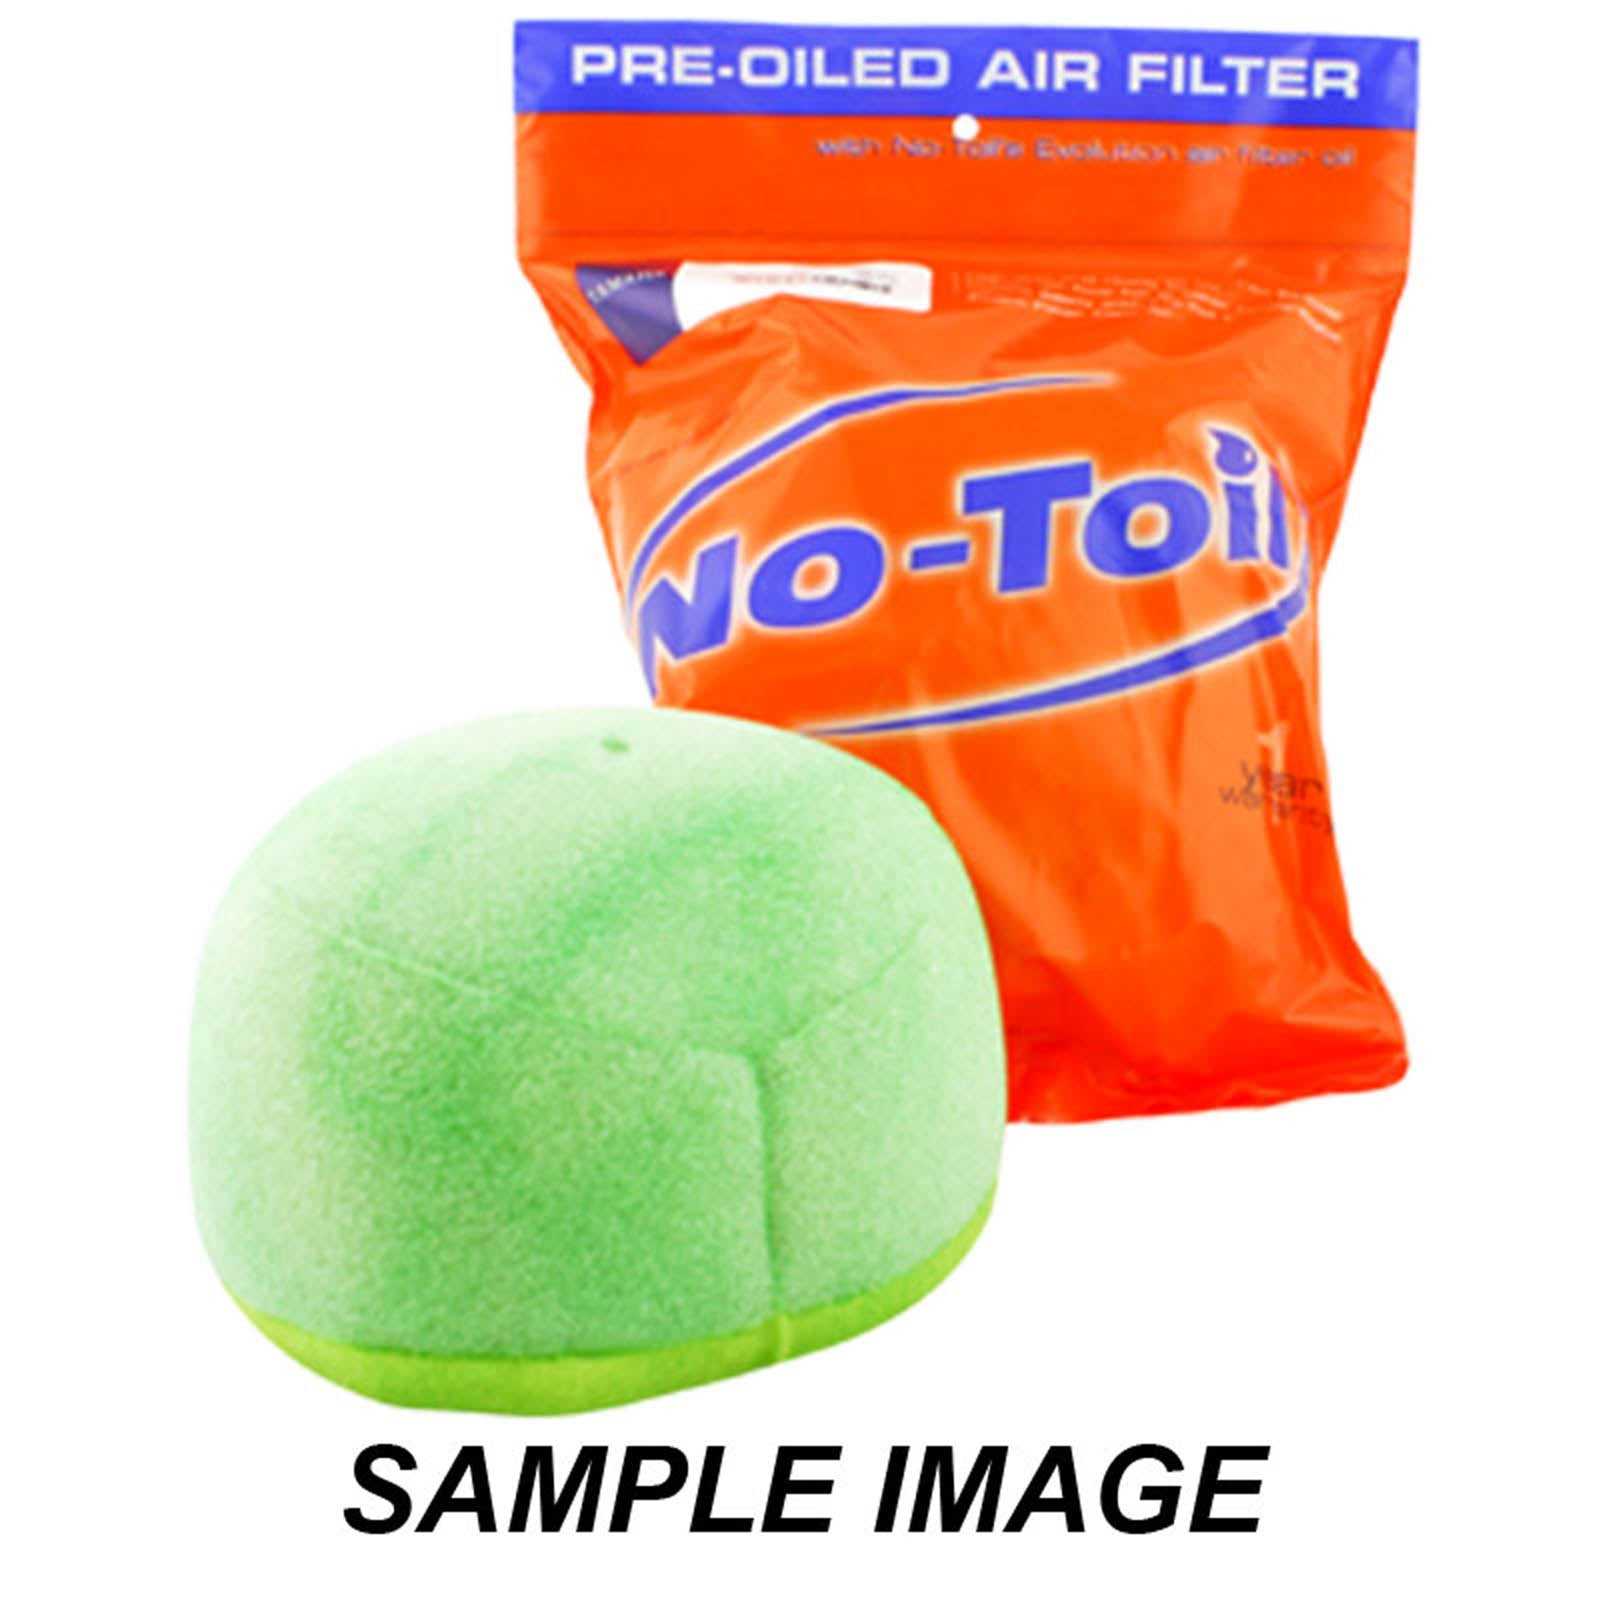 No-Toil, PRE-OILED FILTER YAM Raptor 350-660 All